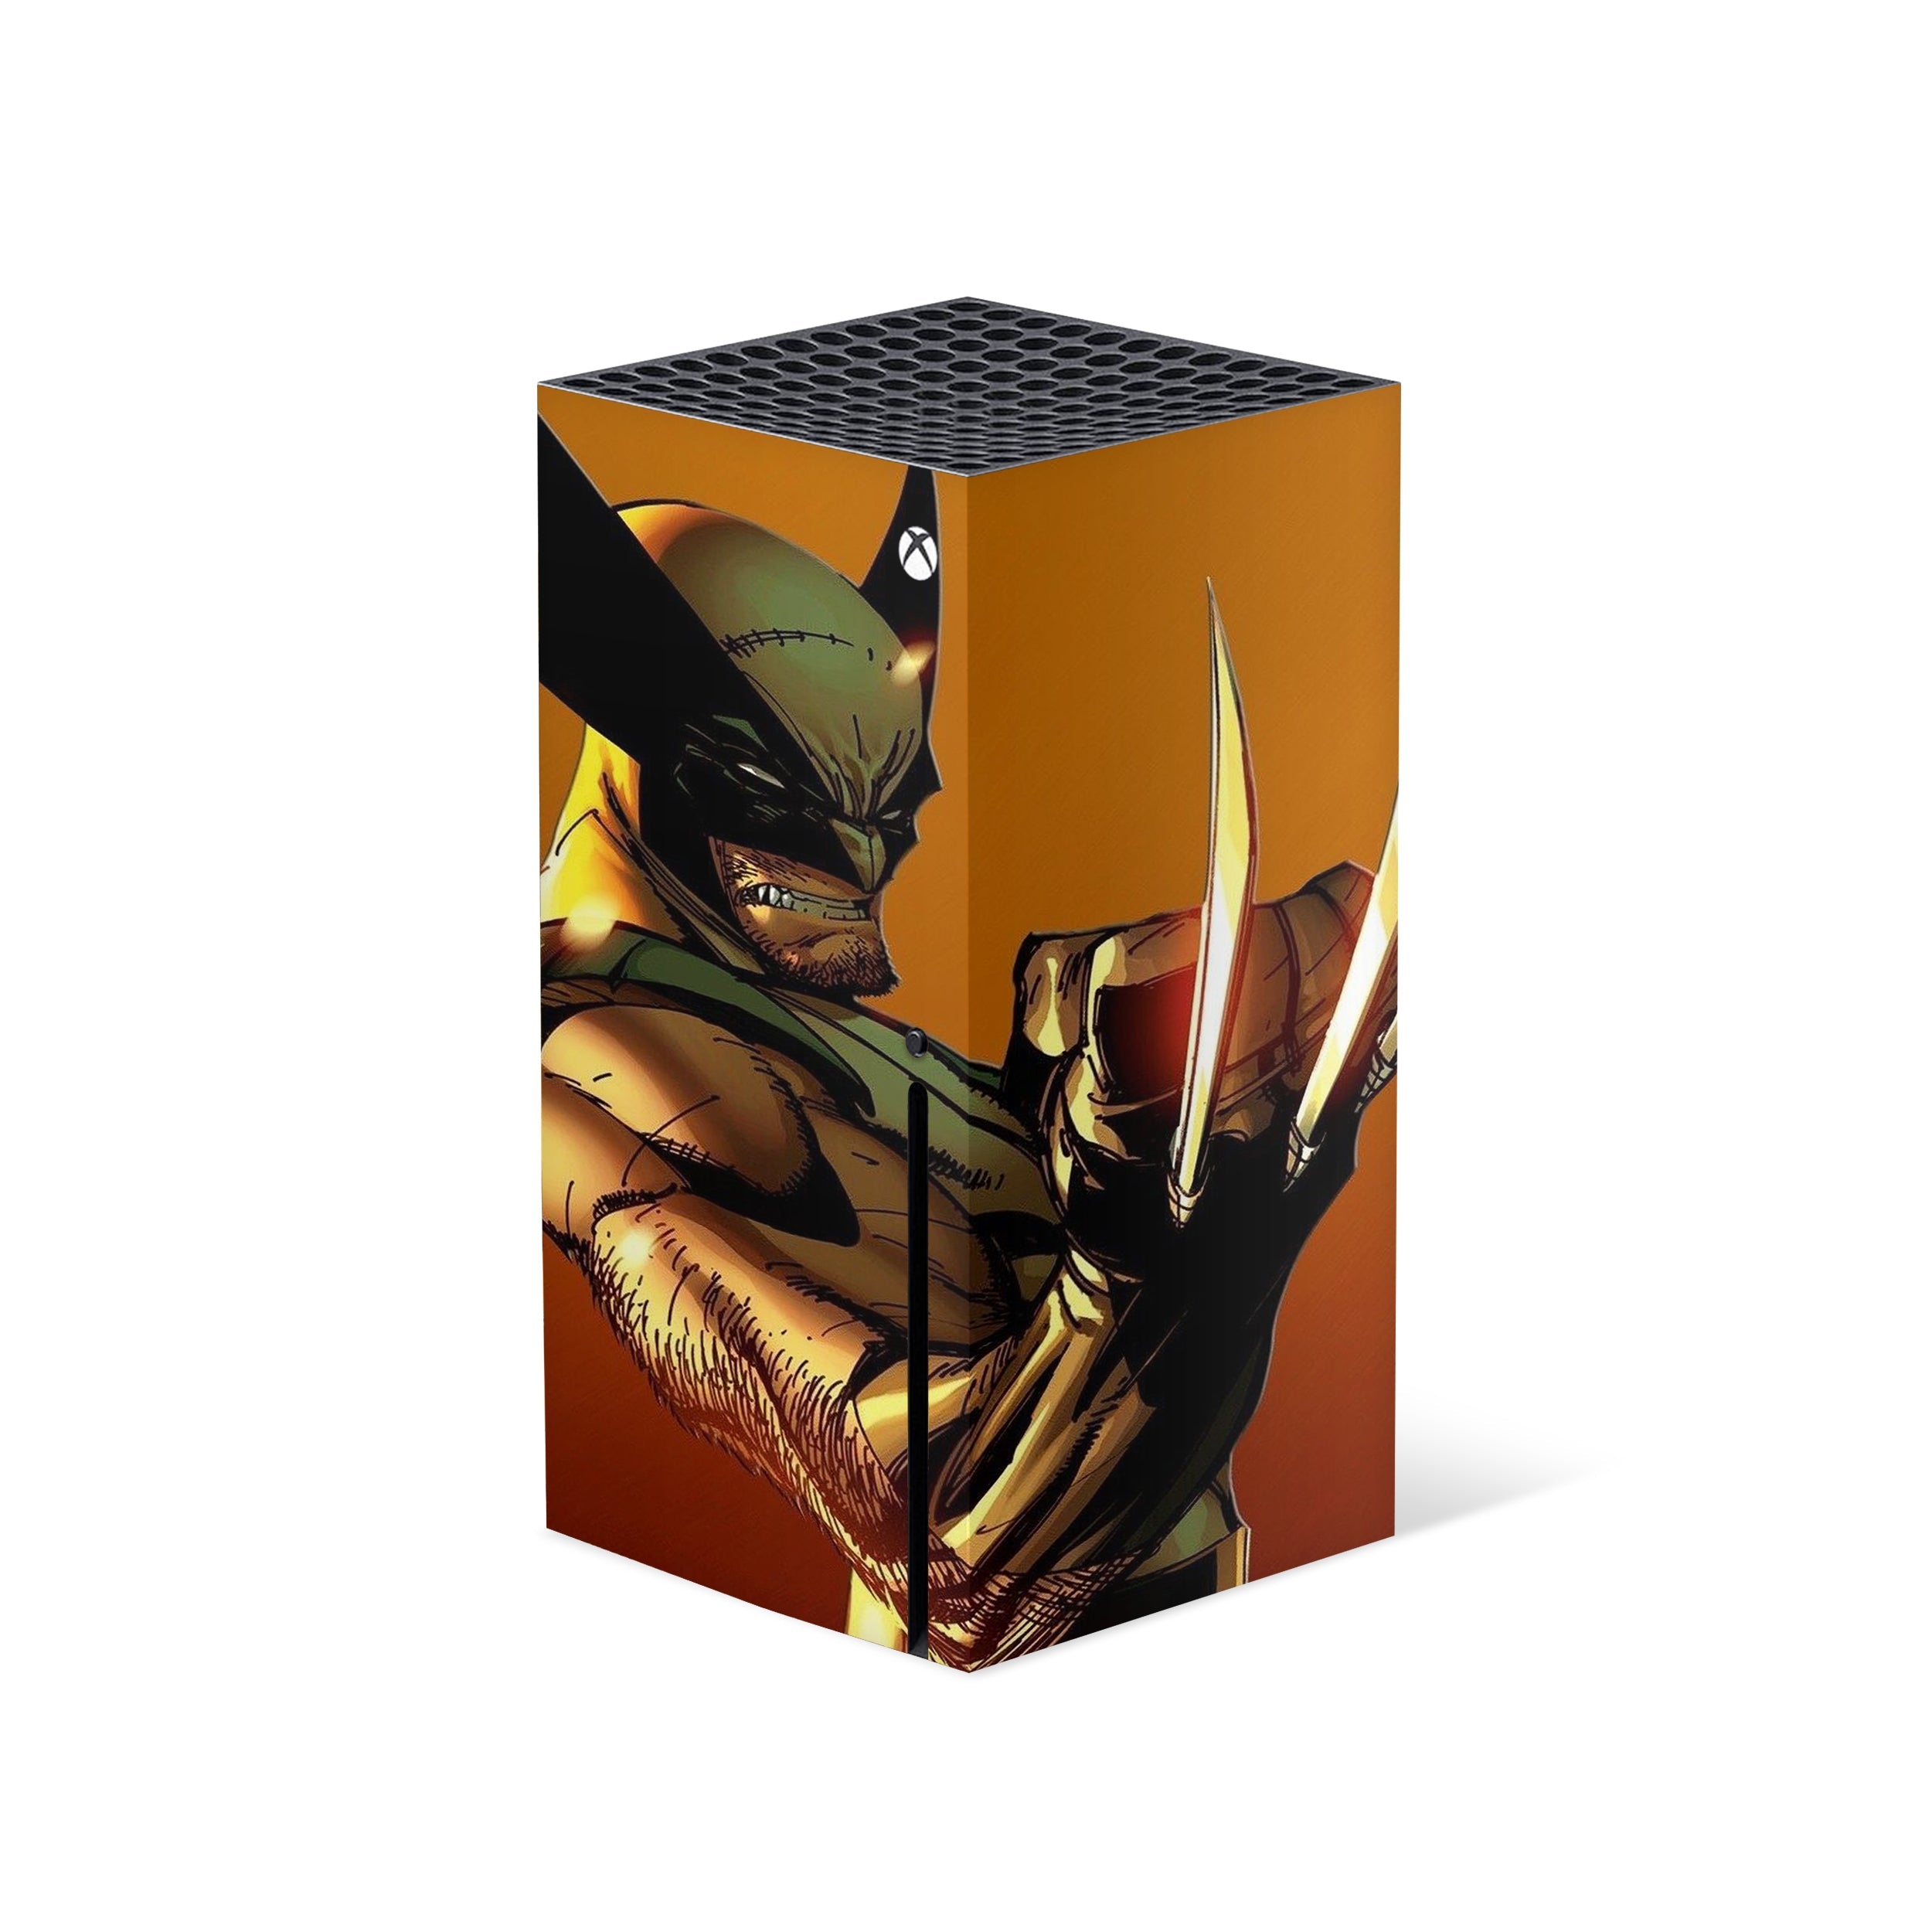 A video game skin featuring a Marvel X Men Wolverine design for the Xbox Series X.